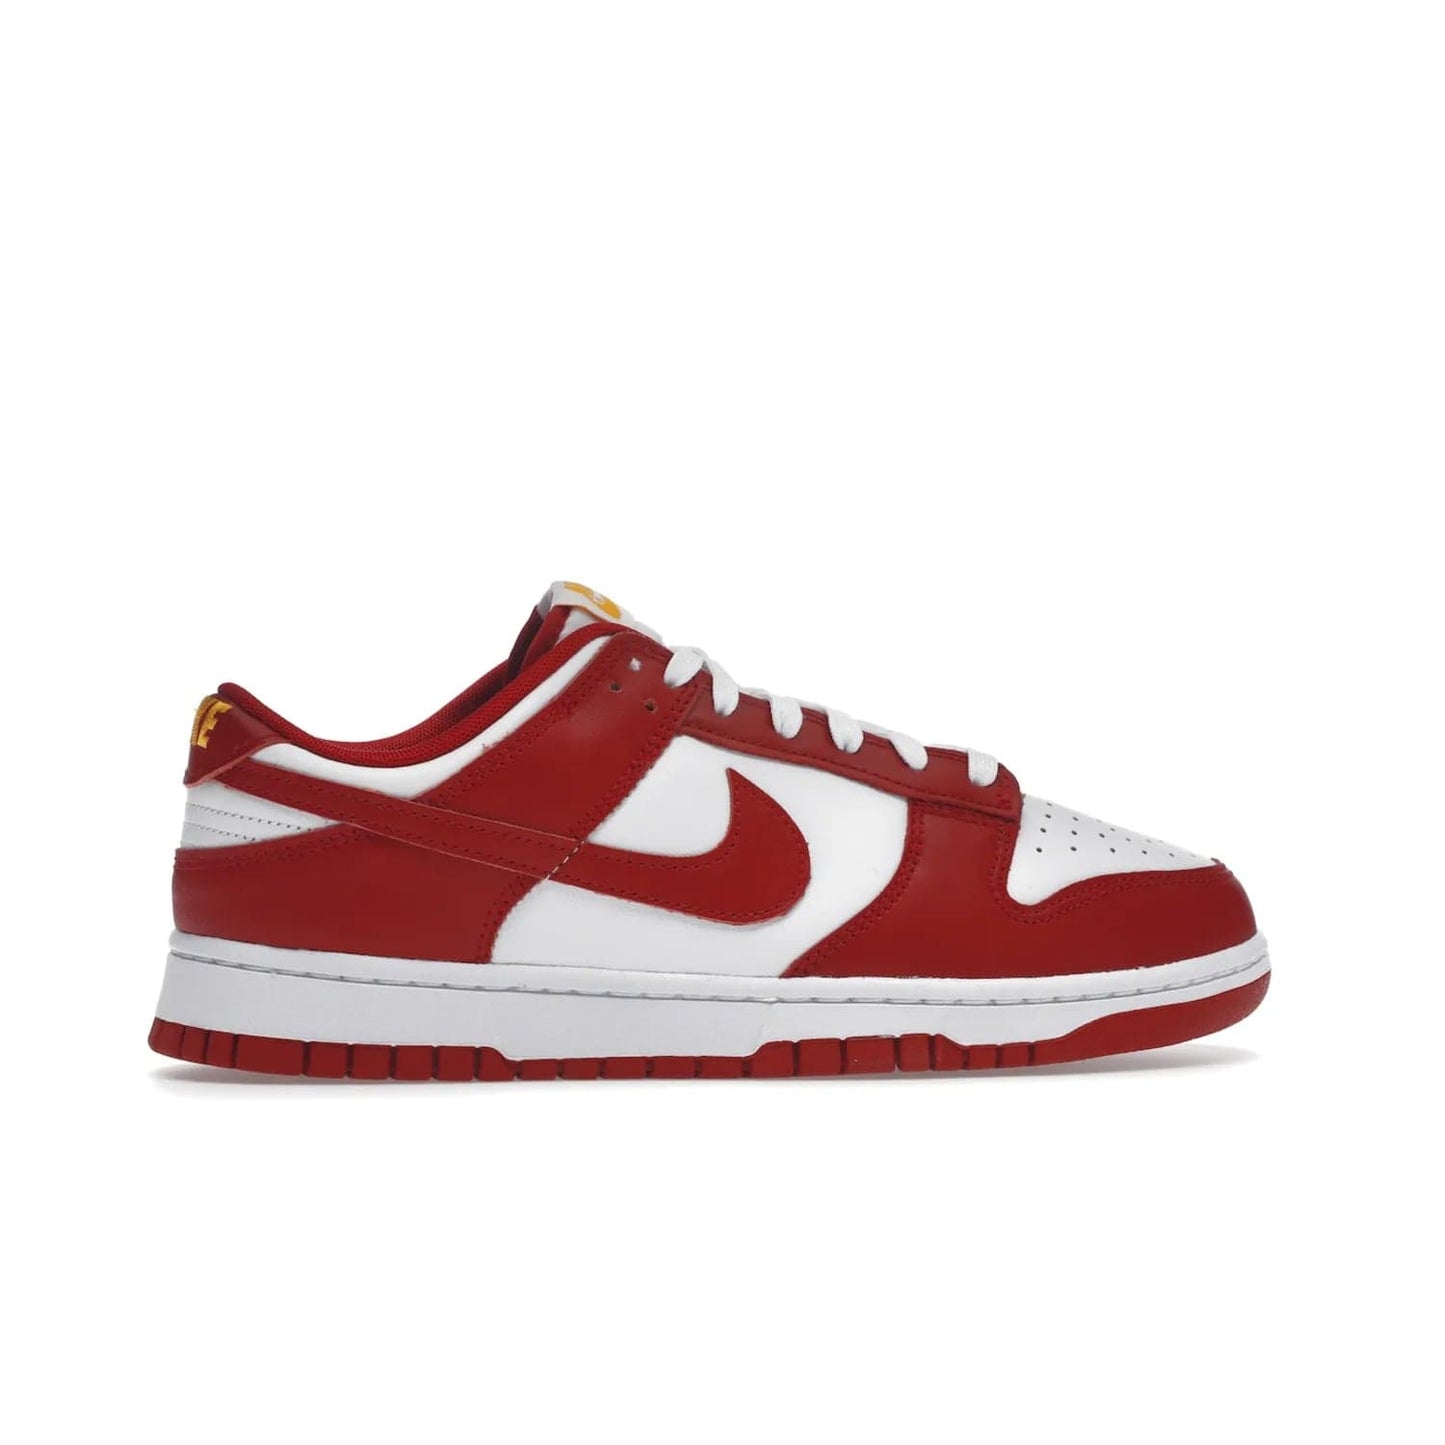 Nike Dunk Low USC - Image 36 - Only at www.BallersClubKickz.com - The Nike Dunk Low USC DD1391-602 colorway captures the eye of University of Southern California fans. Crafted with leather and rubber upper and outsole, this stylish sneaker features a white, gym red, and yellow colorway. With yellow Nike branding, white perforated vamp, and red suede Swoosh, this sneaker turns heads. Get the classic Nike Dunk Low USC releasing on November 9th, 2022.